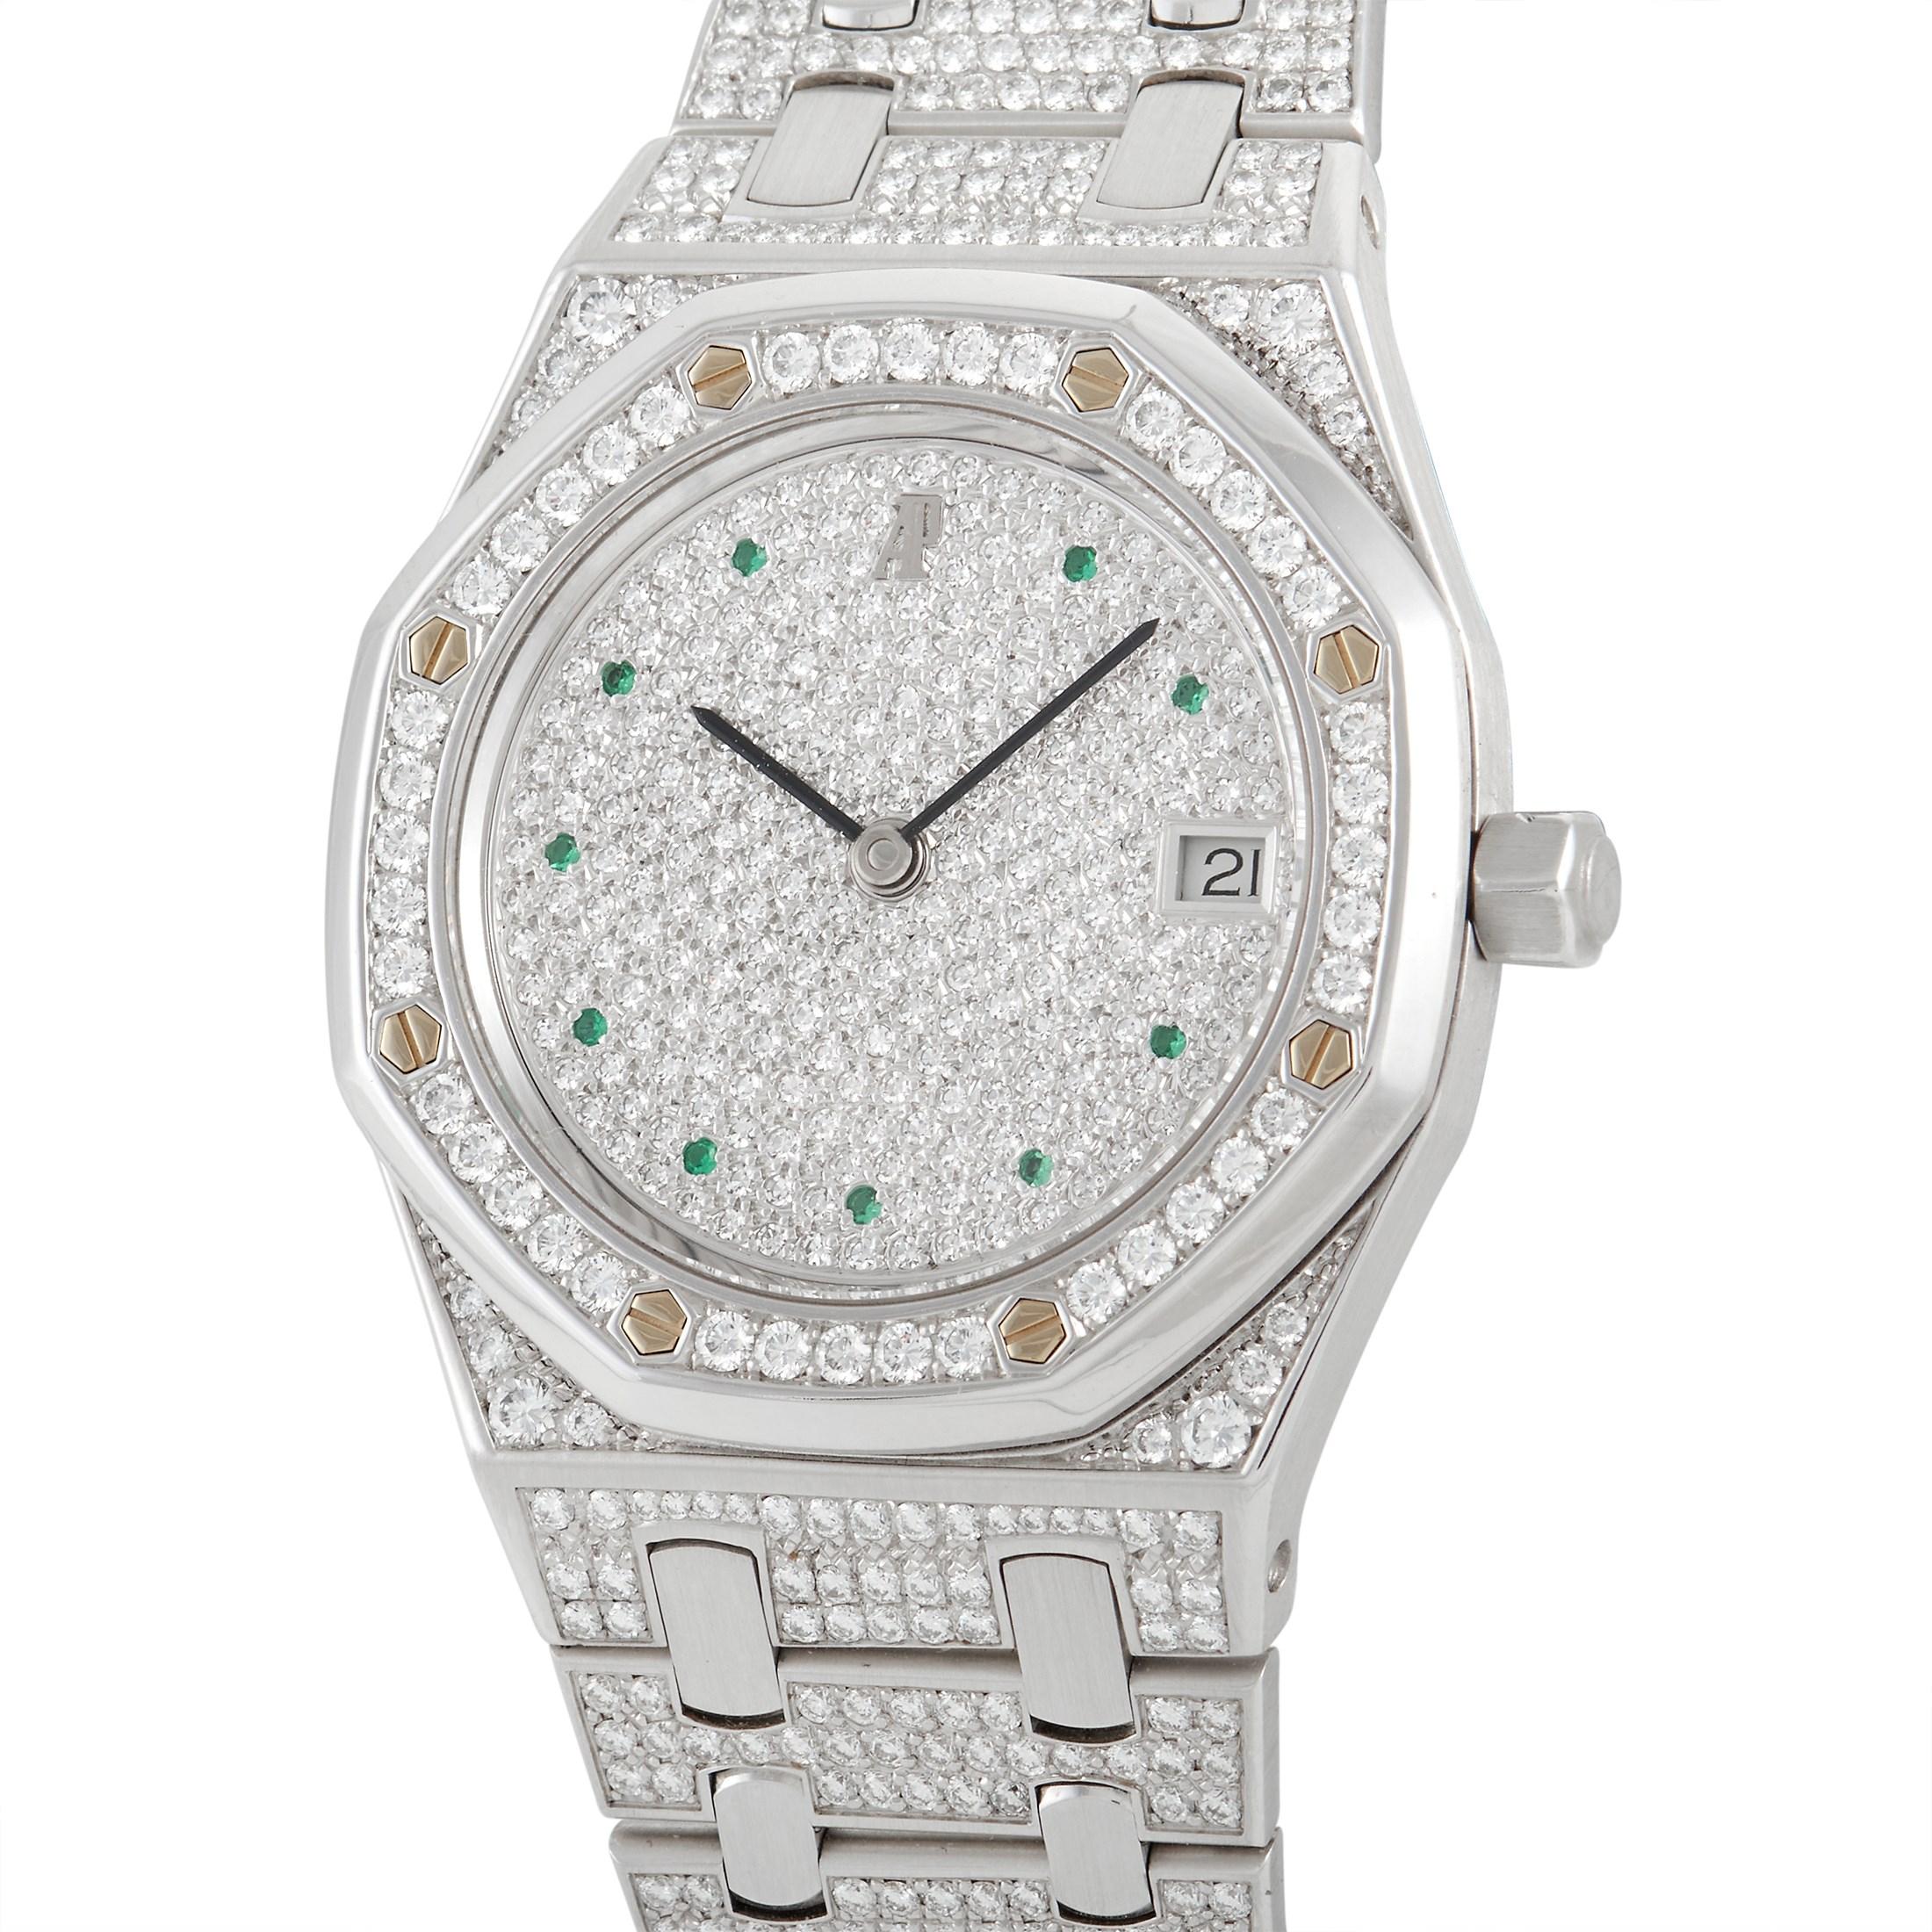 The Audemars Piguet Royal Oak Diamond and Emerald Watch, reference number 14844BC, is a spectacular timepiece that exudes undeniable luxury. 

This breathtaking timepiece is made from 18K white gold and accented by glittering diamonds on the 37mm